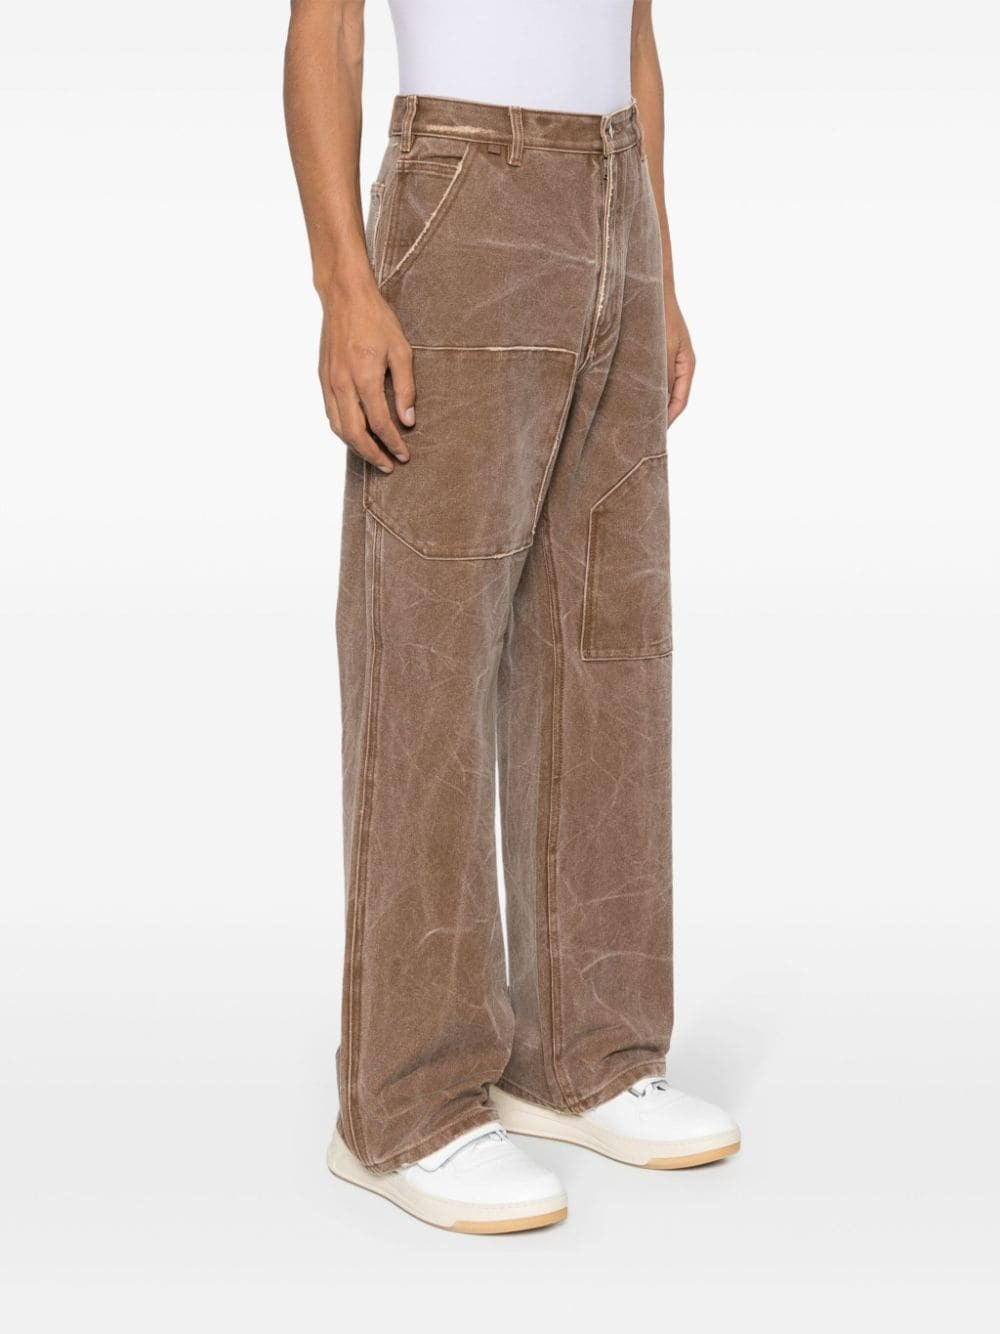 ACNE STUDIOS-CASUAL TROUSERS-CK0101 ALL